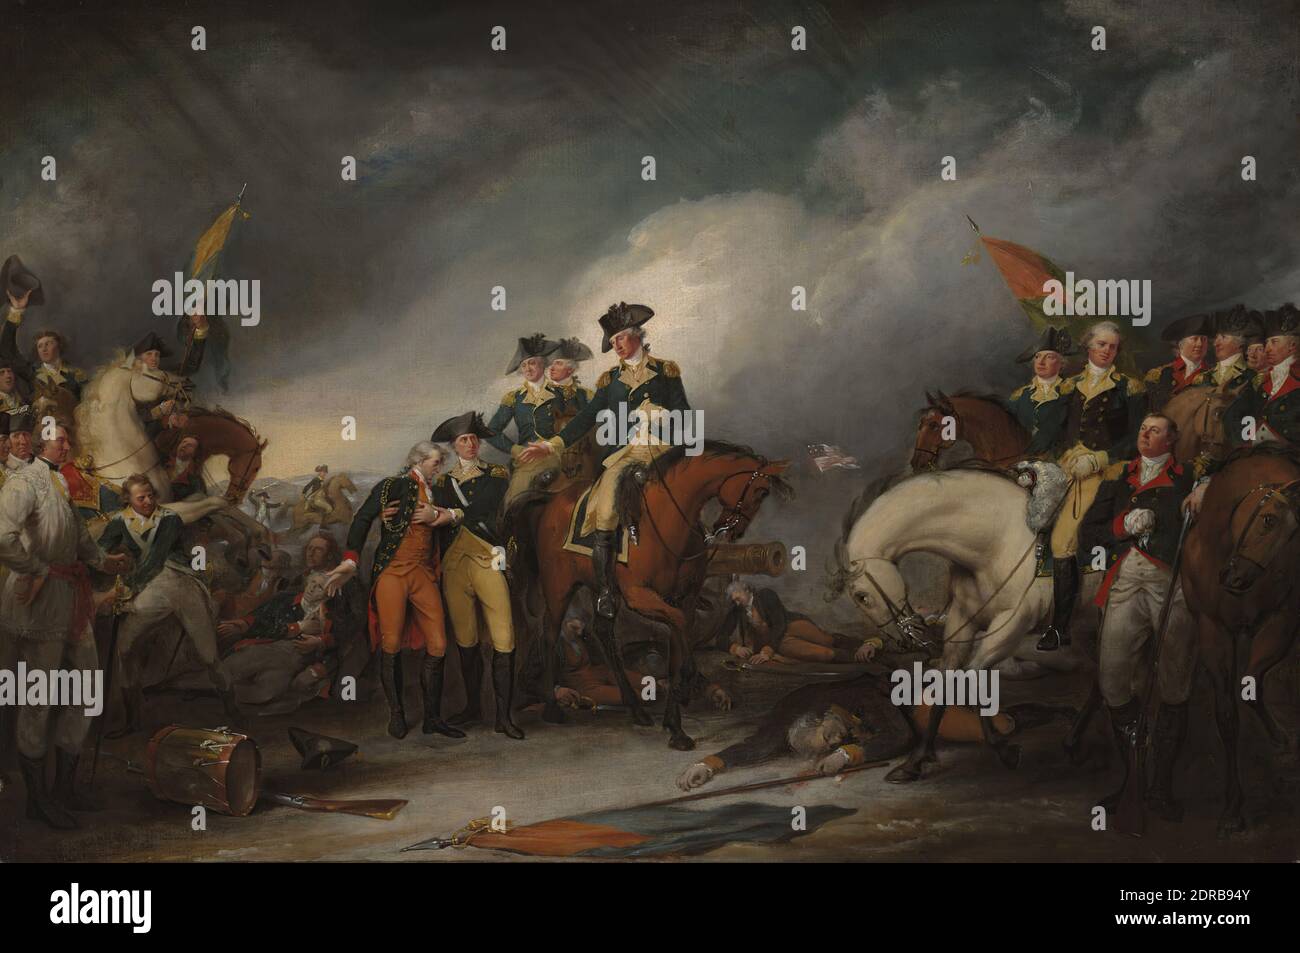 Artist: John Trumbull, American, 1756–1843, The Capture of the Hessians at Trenton, December 26, 1776, Oil on canvas, 20 1/8 × 30 in. (51.1 × 76.2 cm), , Depicted Trenton, New Jersey, American, 18th–19th century, Paintings Stock Photo